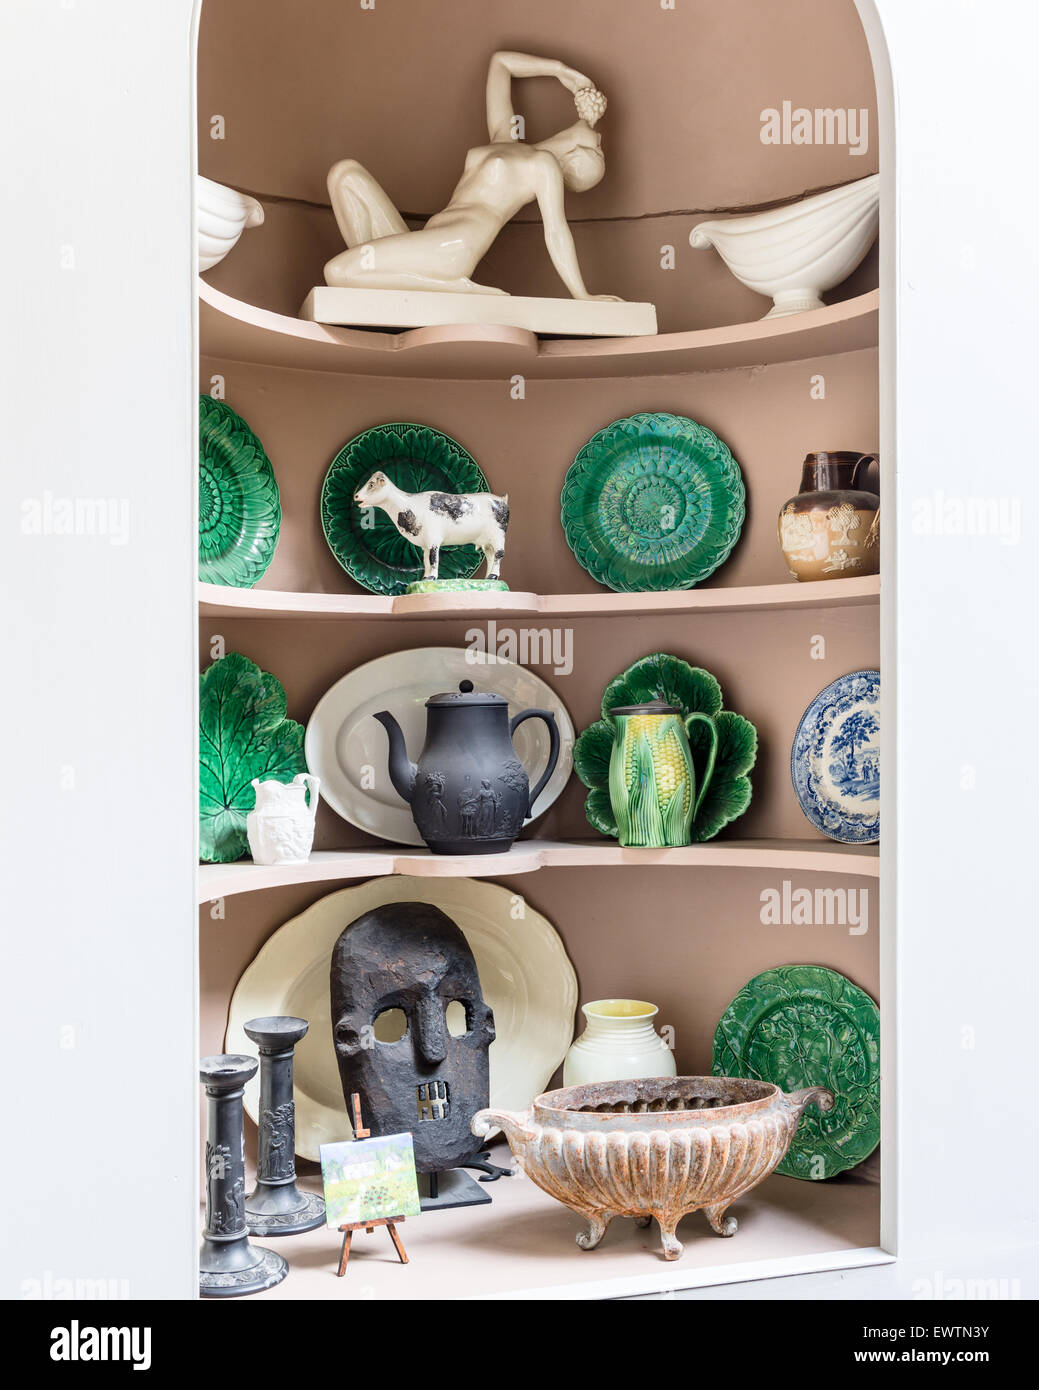 Green cabbage majolica plates alongside African pieces on alcove shelf. Stock Photo